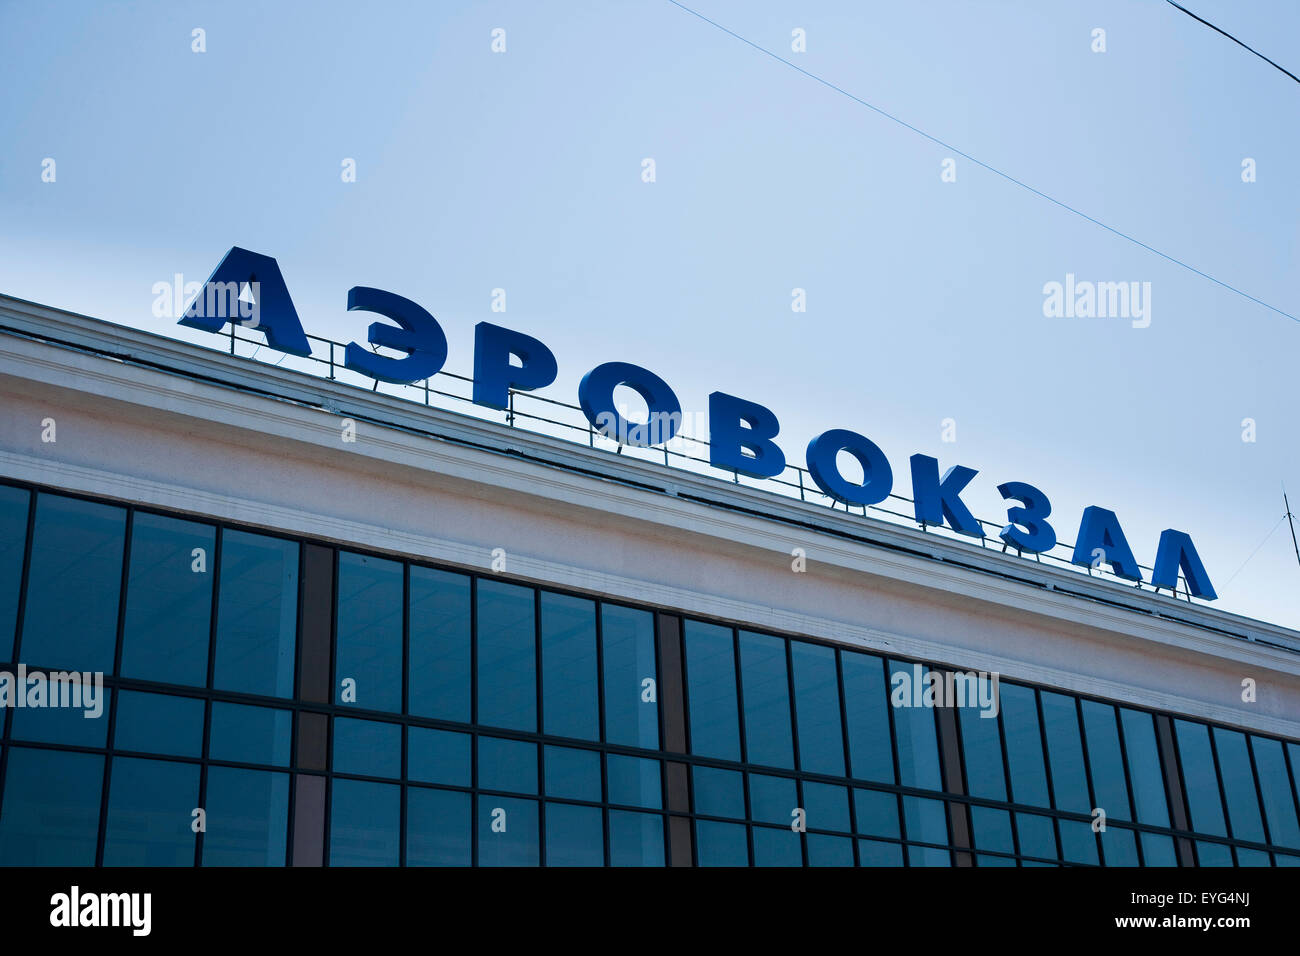 Ukraine, sign and front of building; Odessa, Odessa International Airport Stock Photo